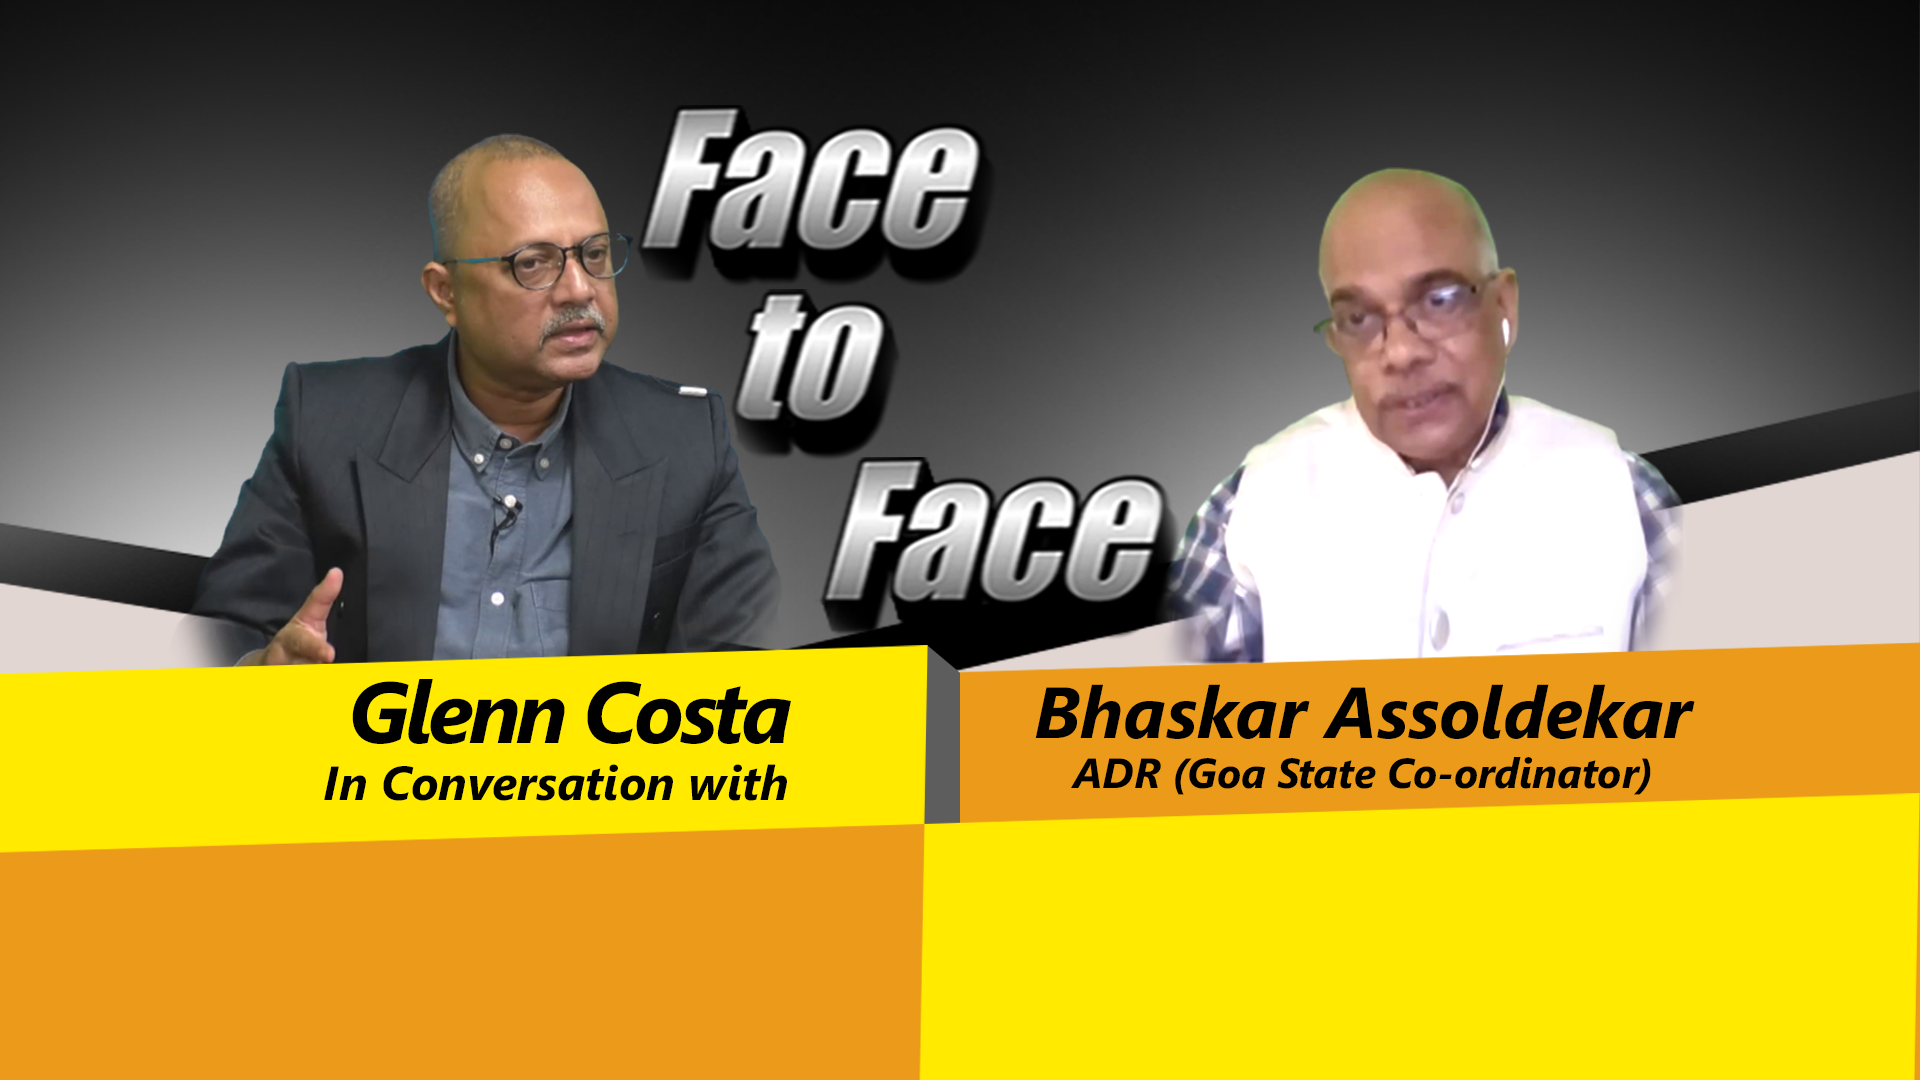 Face to face : WILL KARNATAKA RESULTS AFFECT 2024???